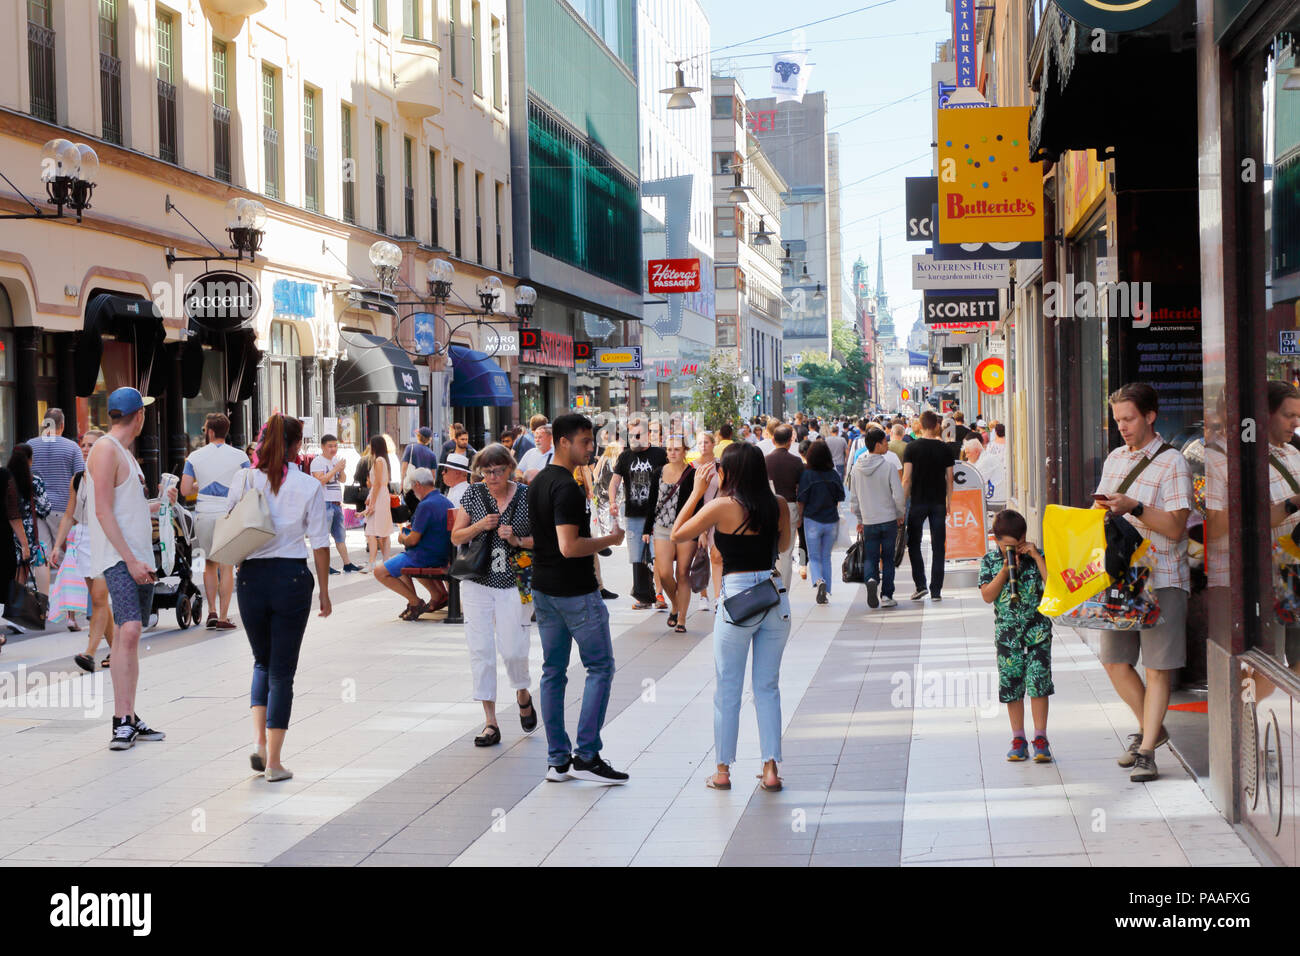 Stockholm, Sweden - July 12, 2018: View of people at the shopping pedestrian only street Drottninggatan in the downtown district. Stock Photo